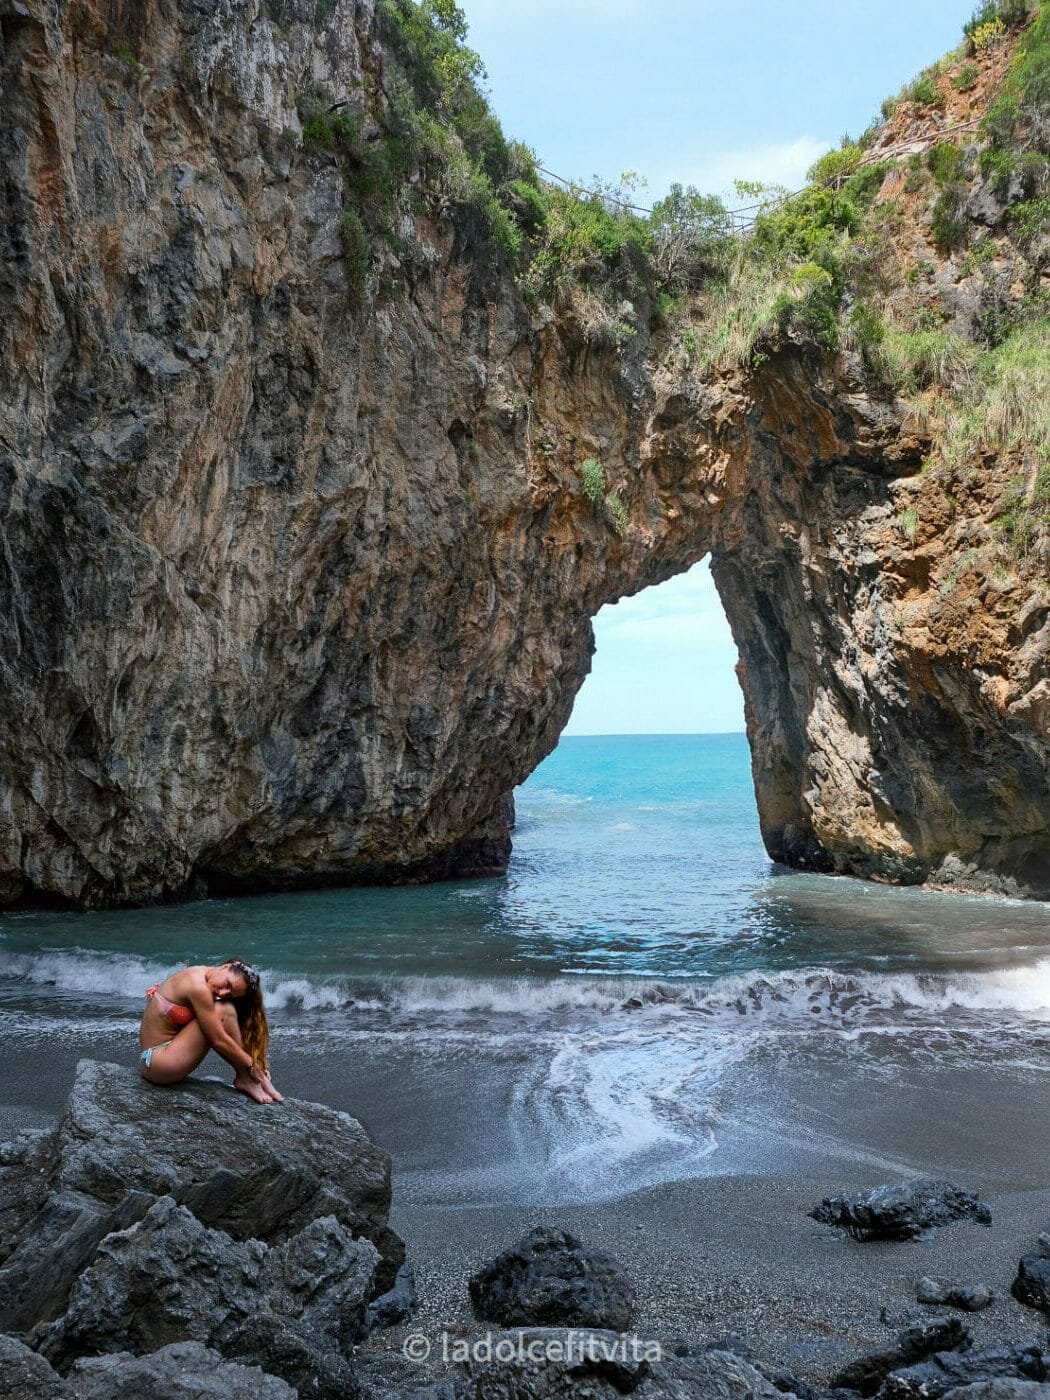 A girl on a rock posing at the beautiful Arcomagno Beach in Calabria, Italy